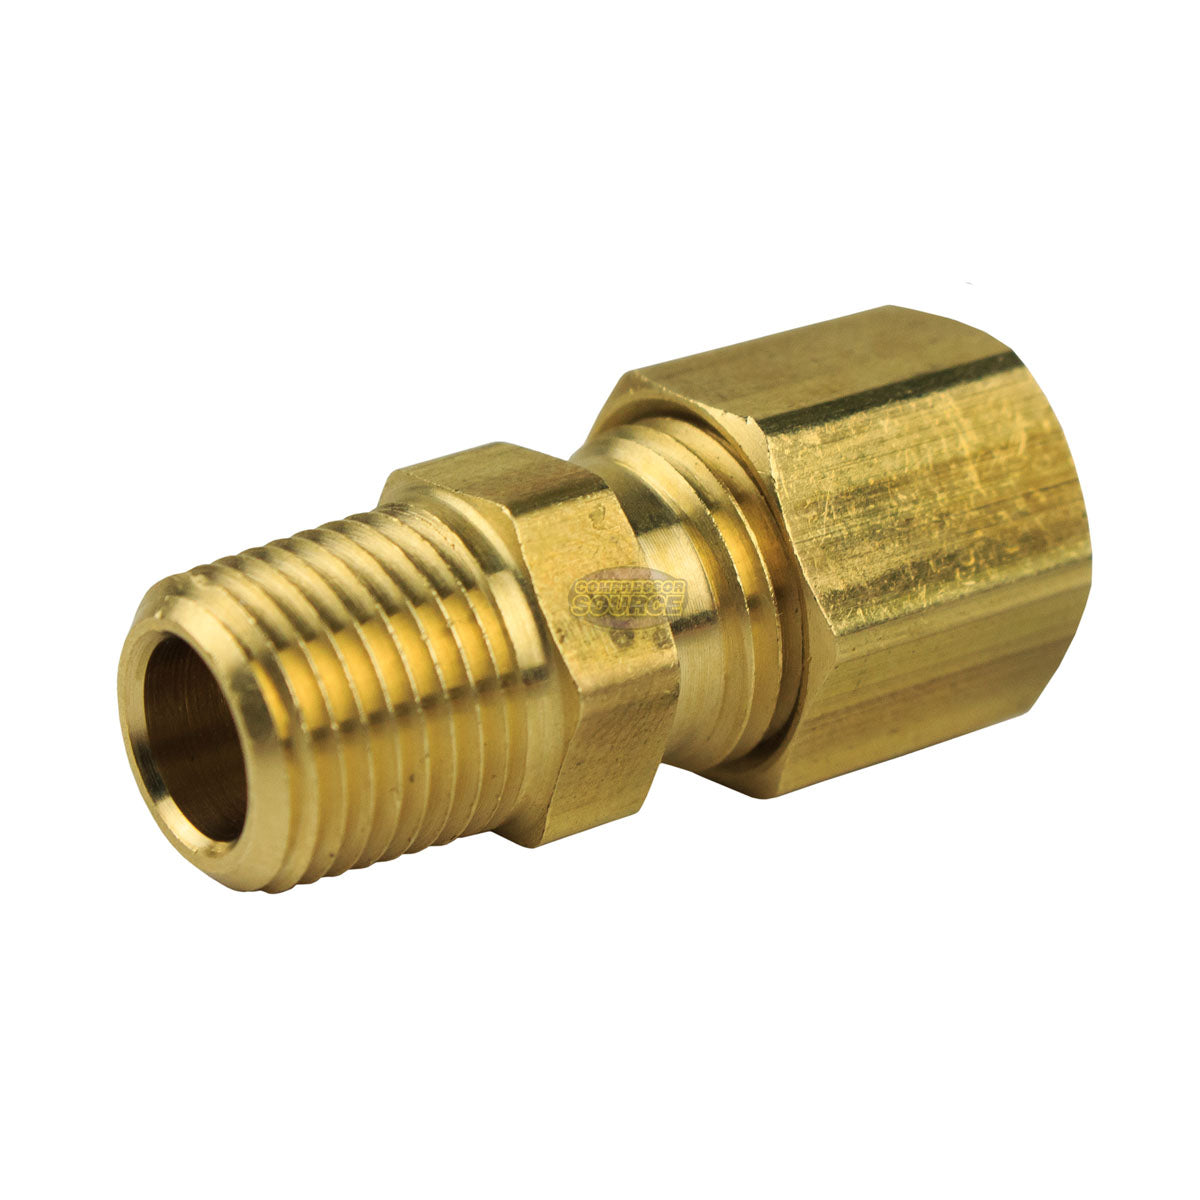 1/4 x 1/8 Compression x Male NPT Adapter Pipe Fitting Tube